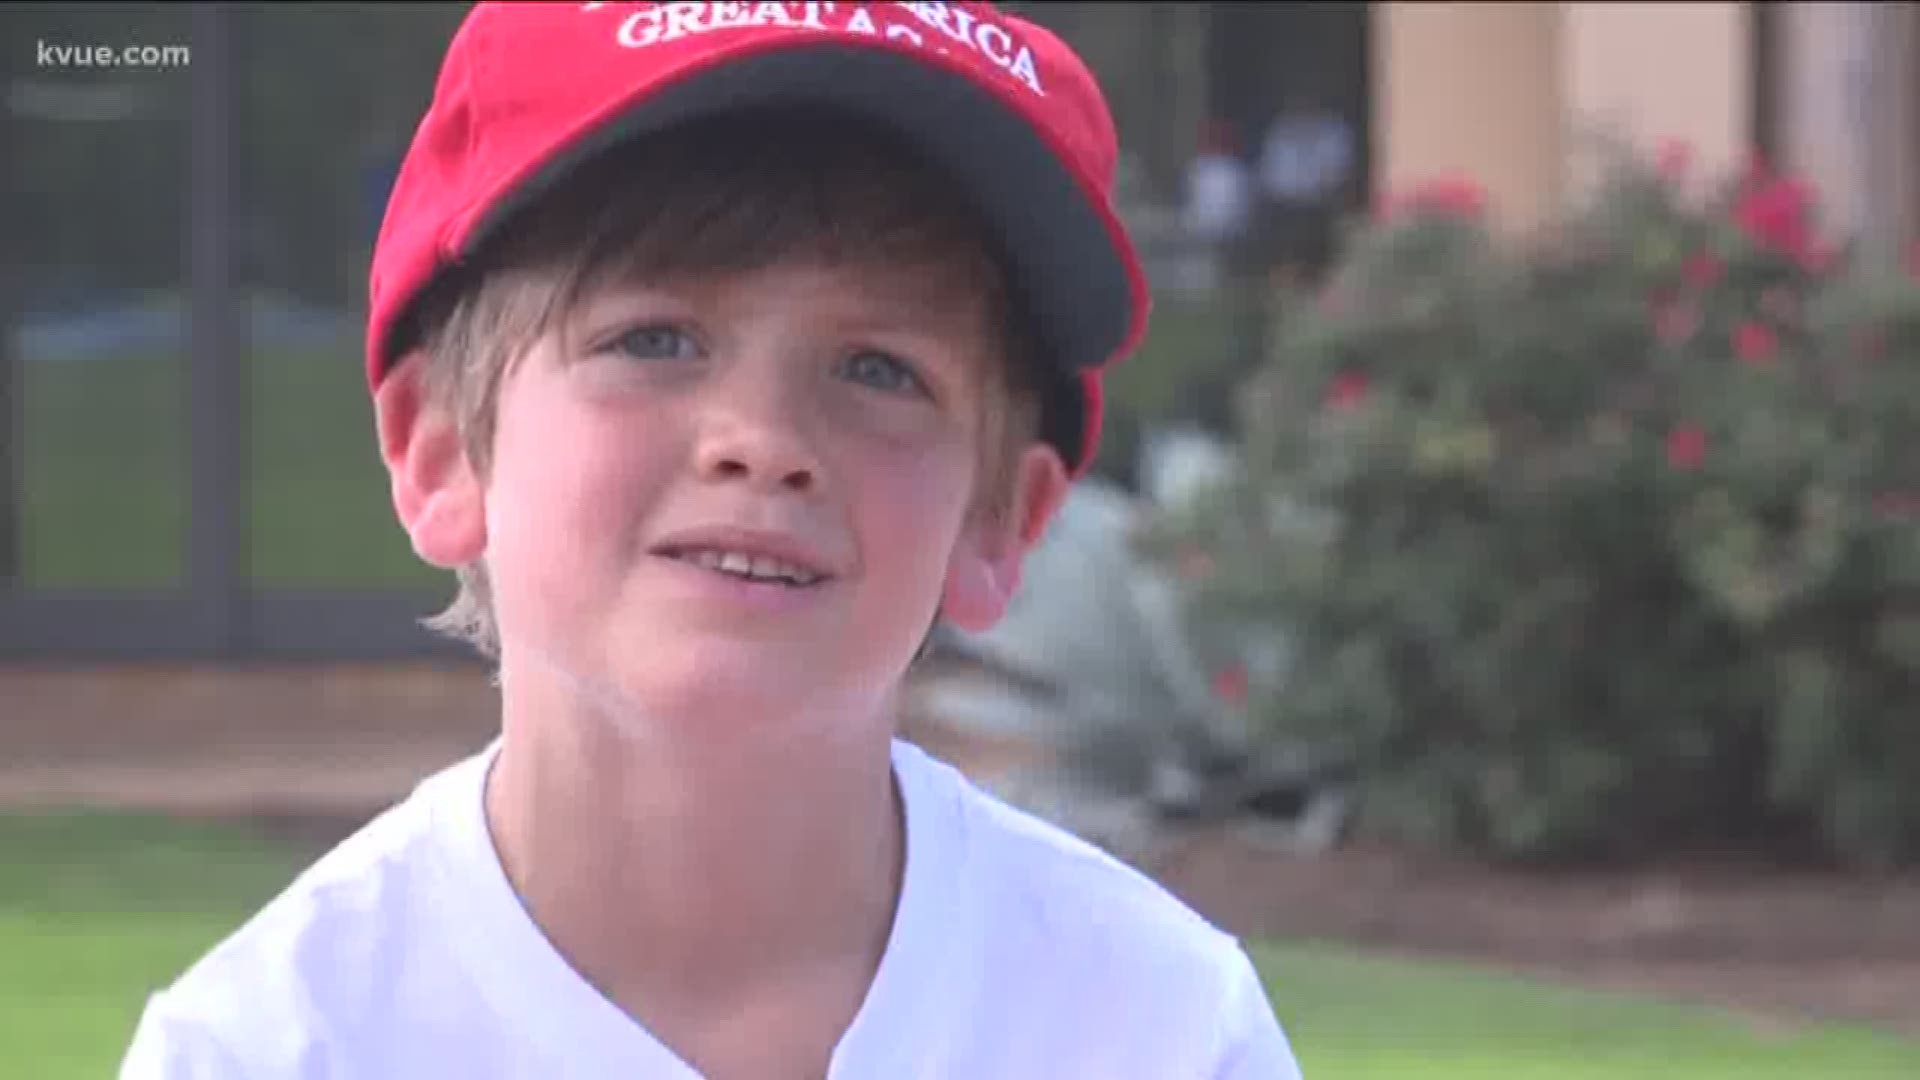 A 7-year-old Austin boy selling hot chocolate as a fundraiser for President Trump's border wall started a social media frenzy, but for him it's turned into what you could call a successful business.